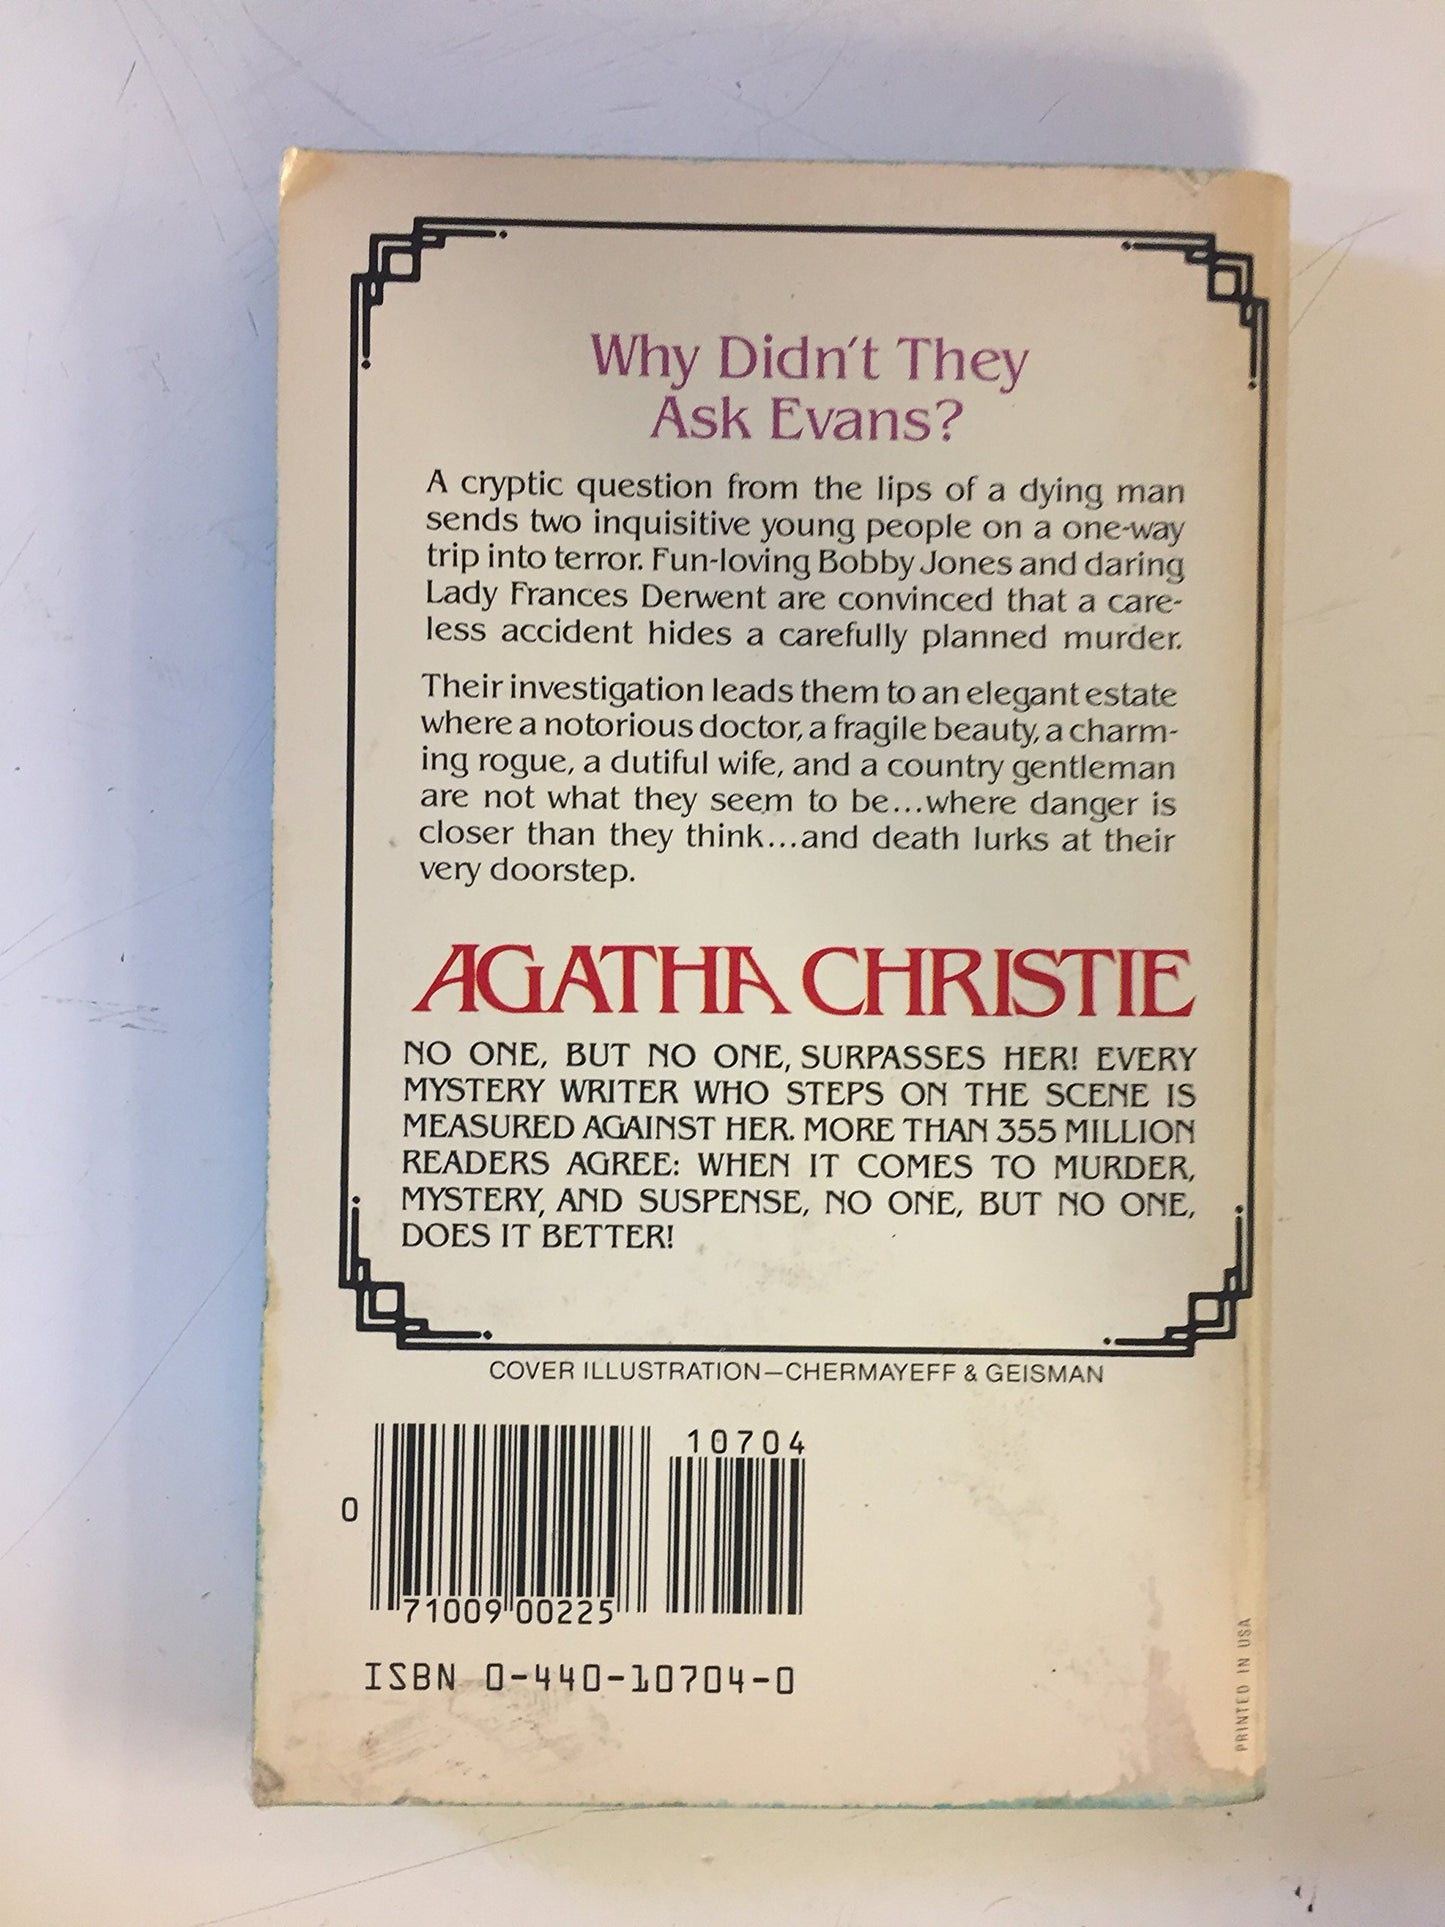 Vintage 1981 Mass Market Paperback The Boomerang Clue Agatha Christie Mobil Showcase Network Tie-In Why Didn't They Ask Evans?